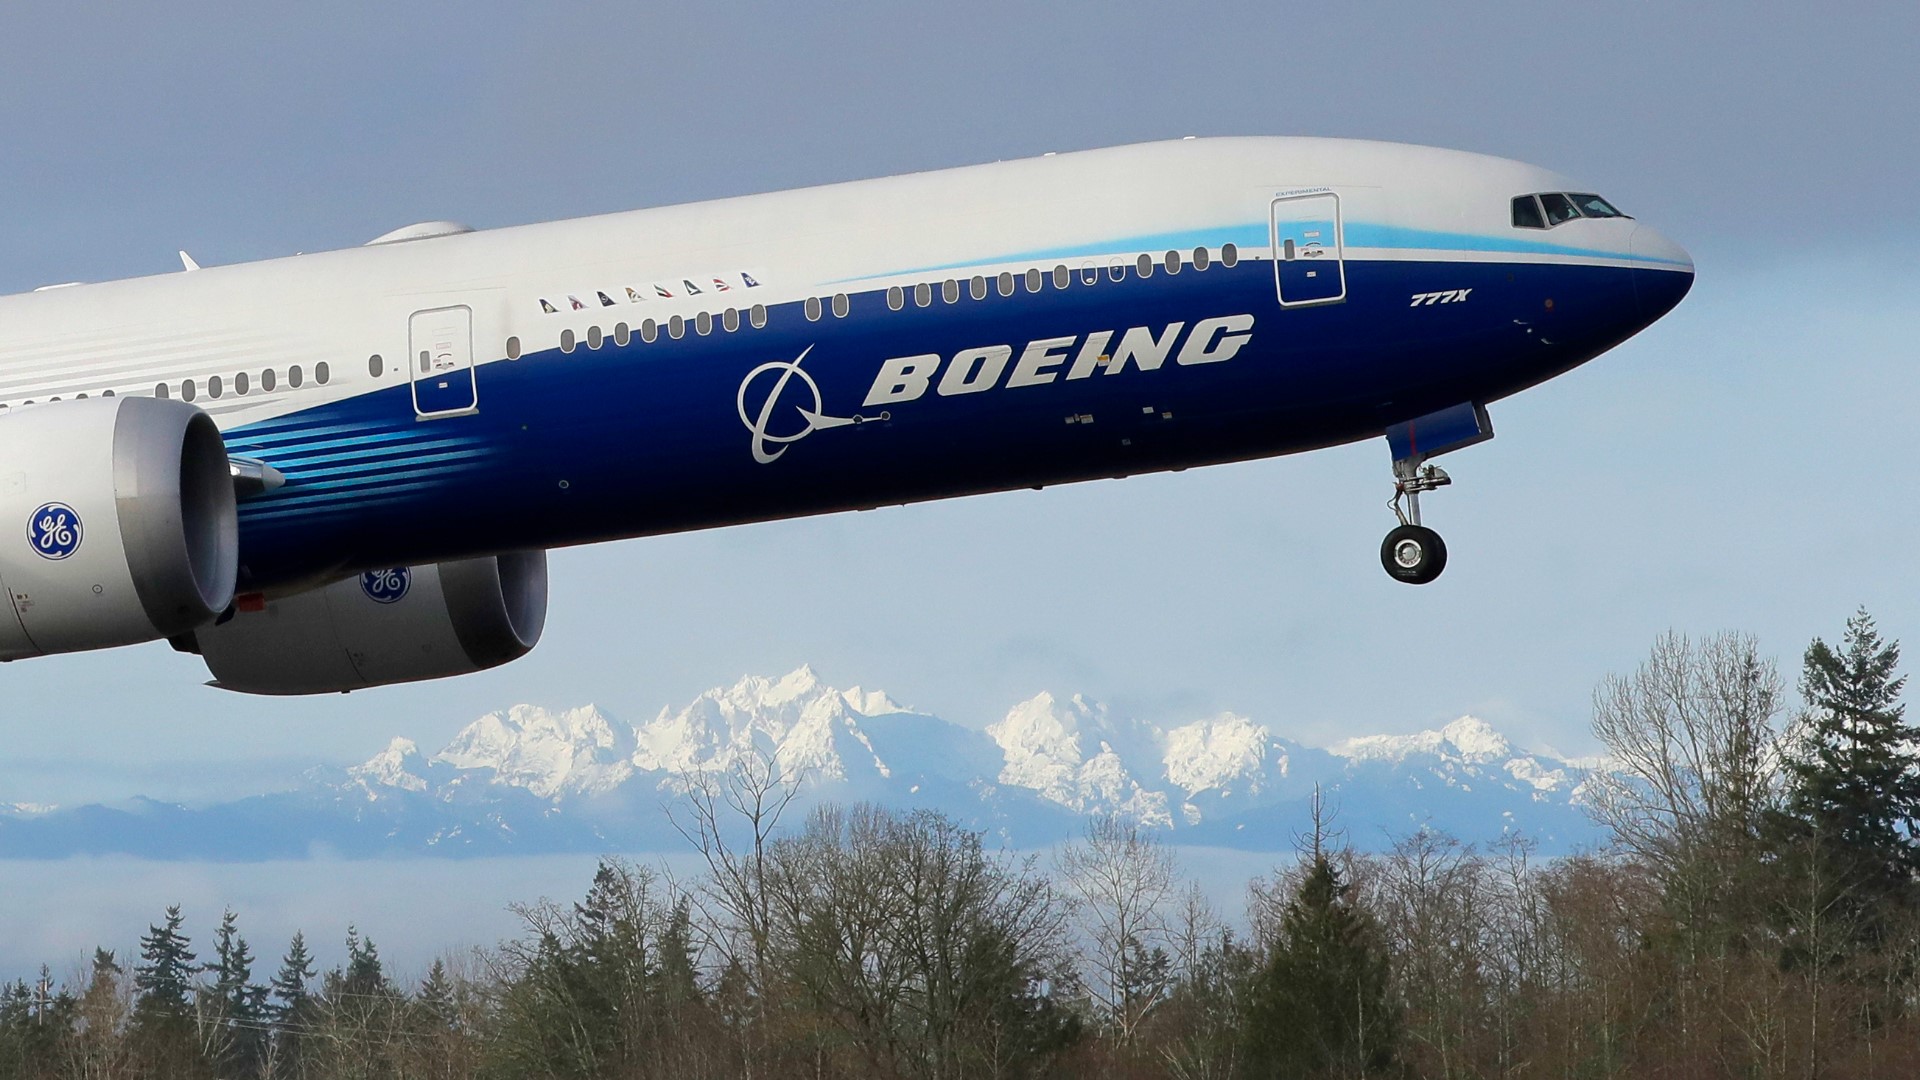 Boeing said Wednesday it lost $663 million in the fourth quarter as higher production costs and supply-chain problems offset rising revenue.